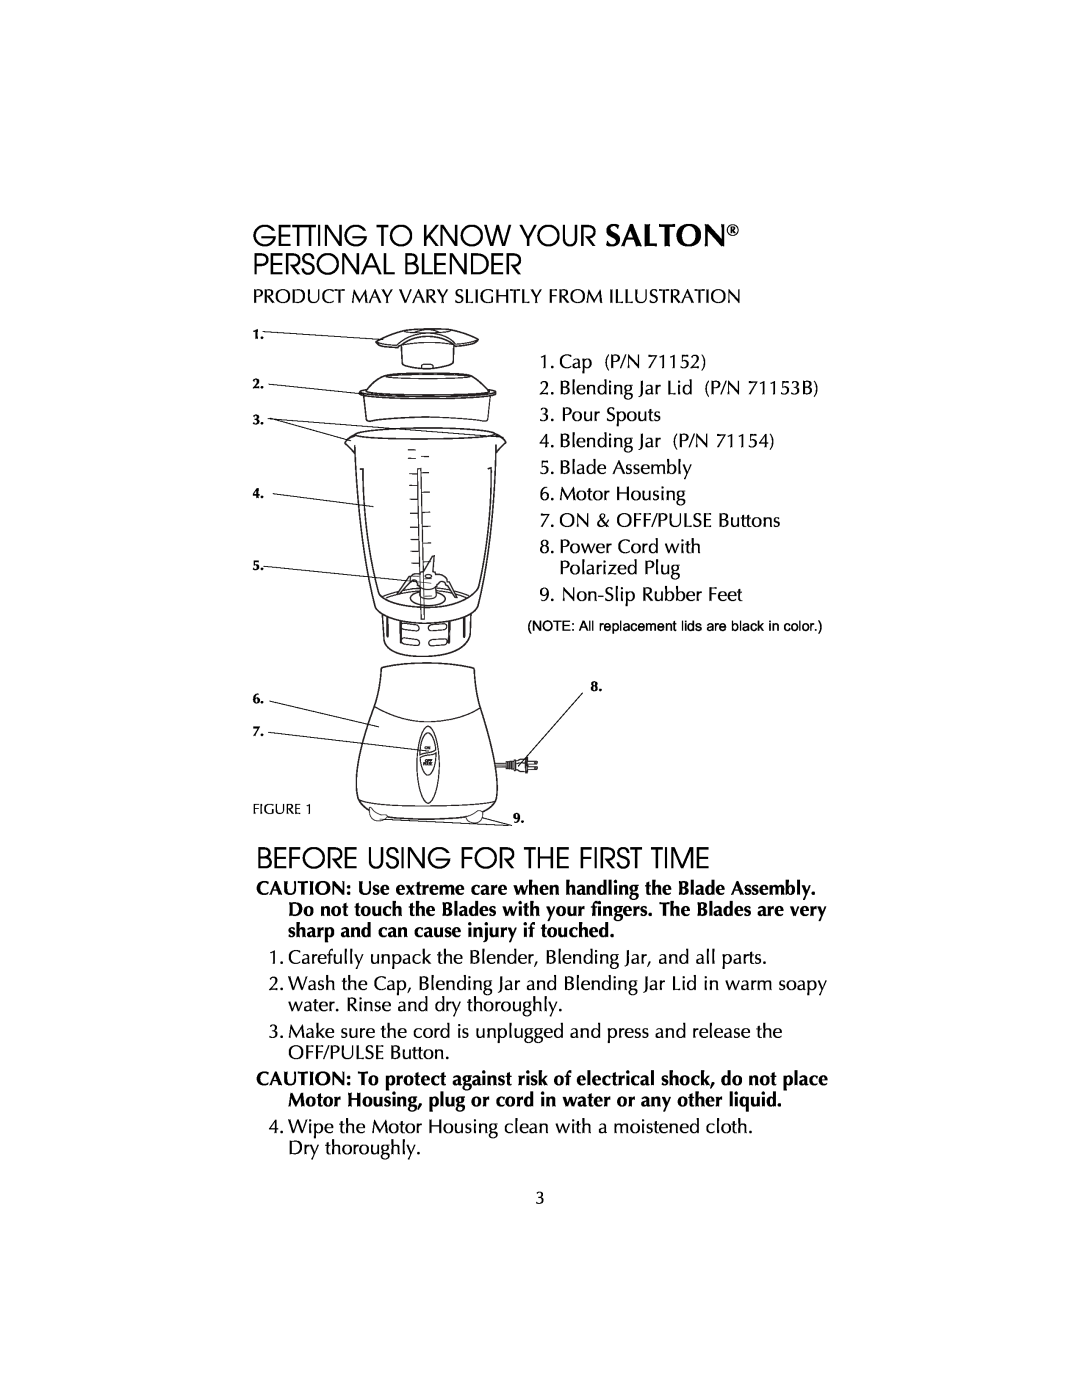 Salton BL22 owner manual Getting To Know Your Salton Personal Blender, Before Using For The First Time 